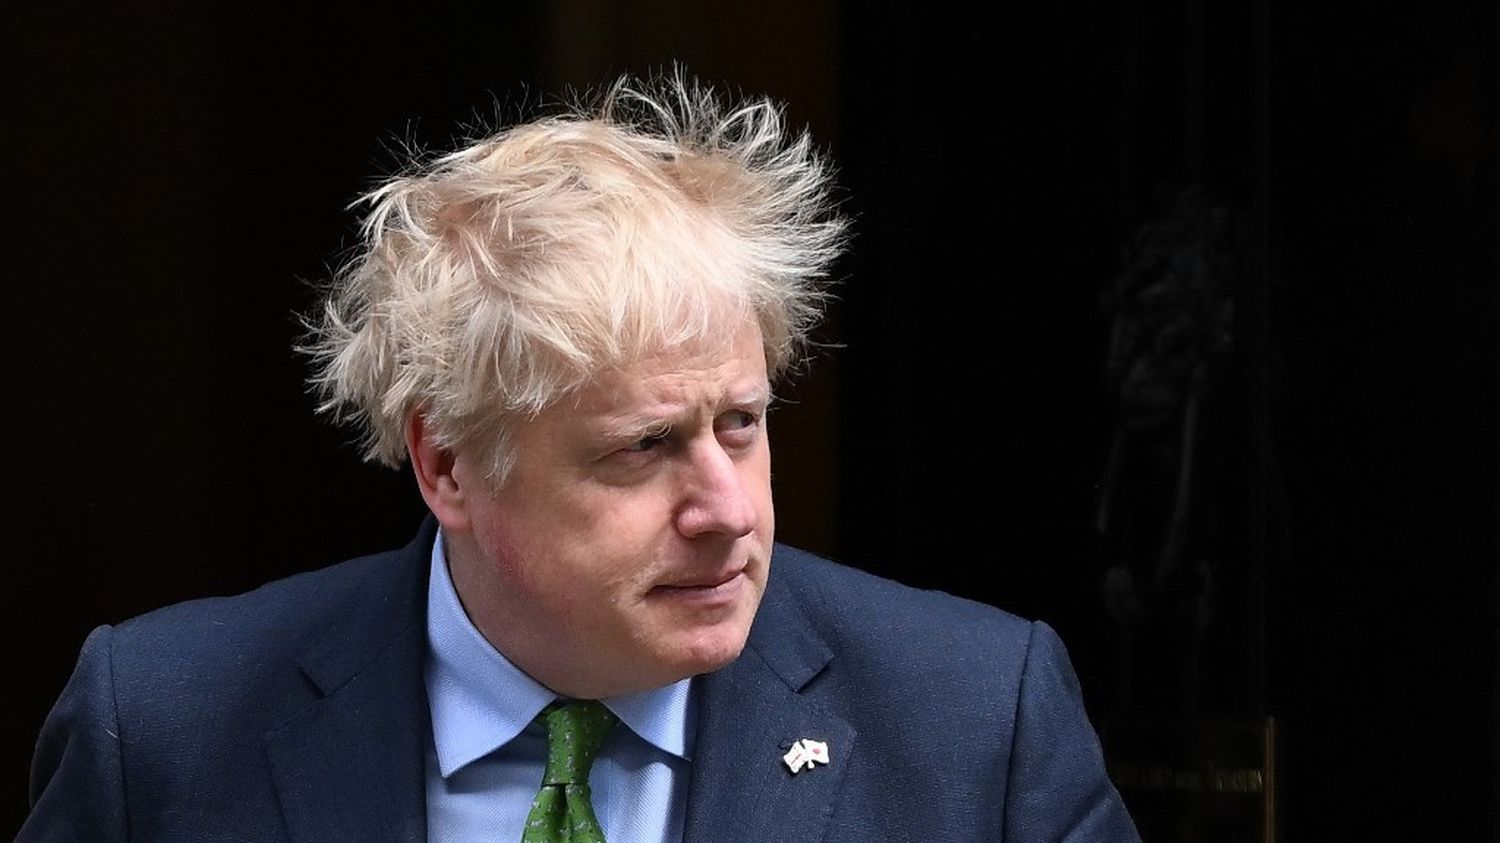 United Kingdom: Setback in local elections for Prime Minister Boris Johnson, weakened by scandals
